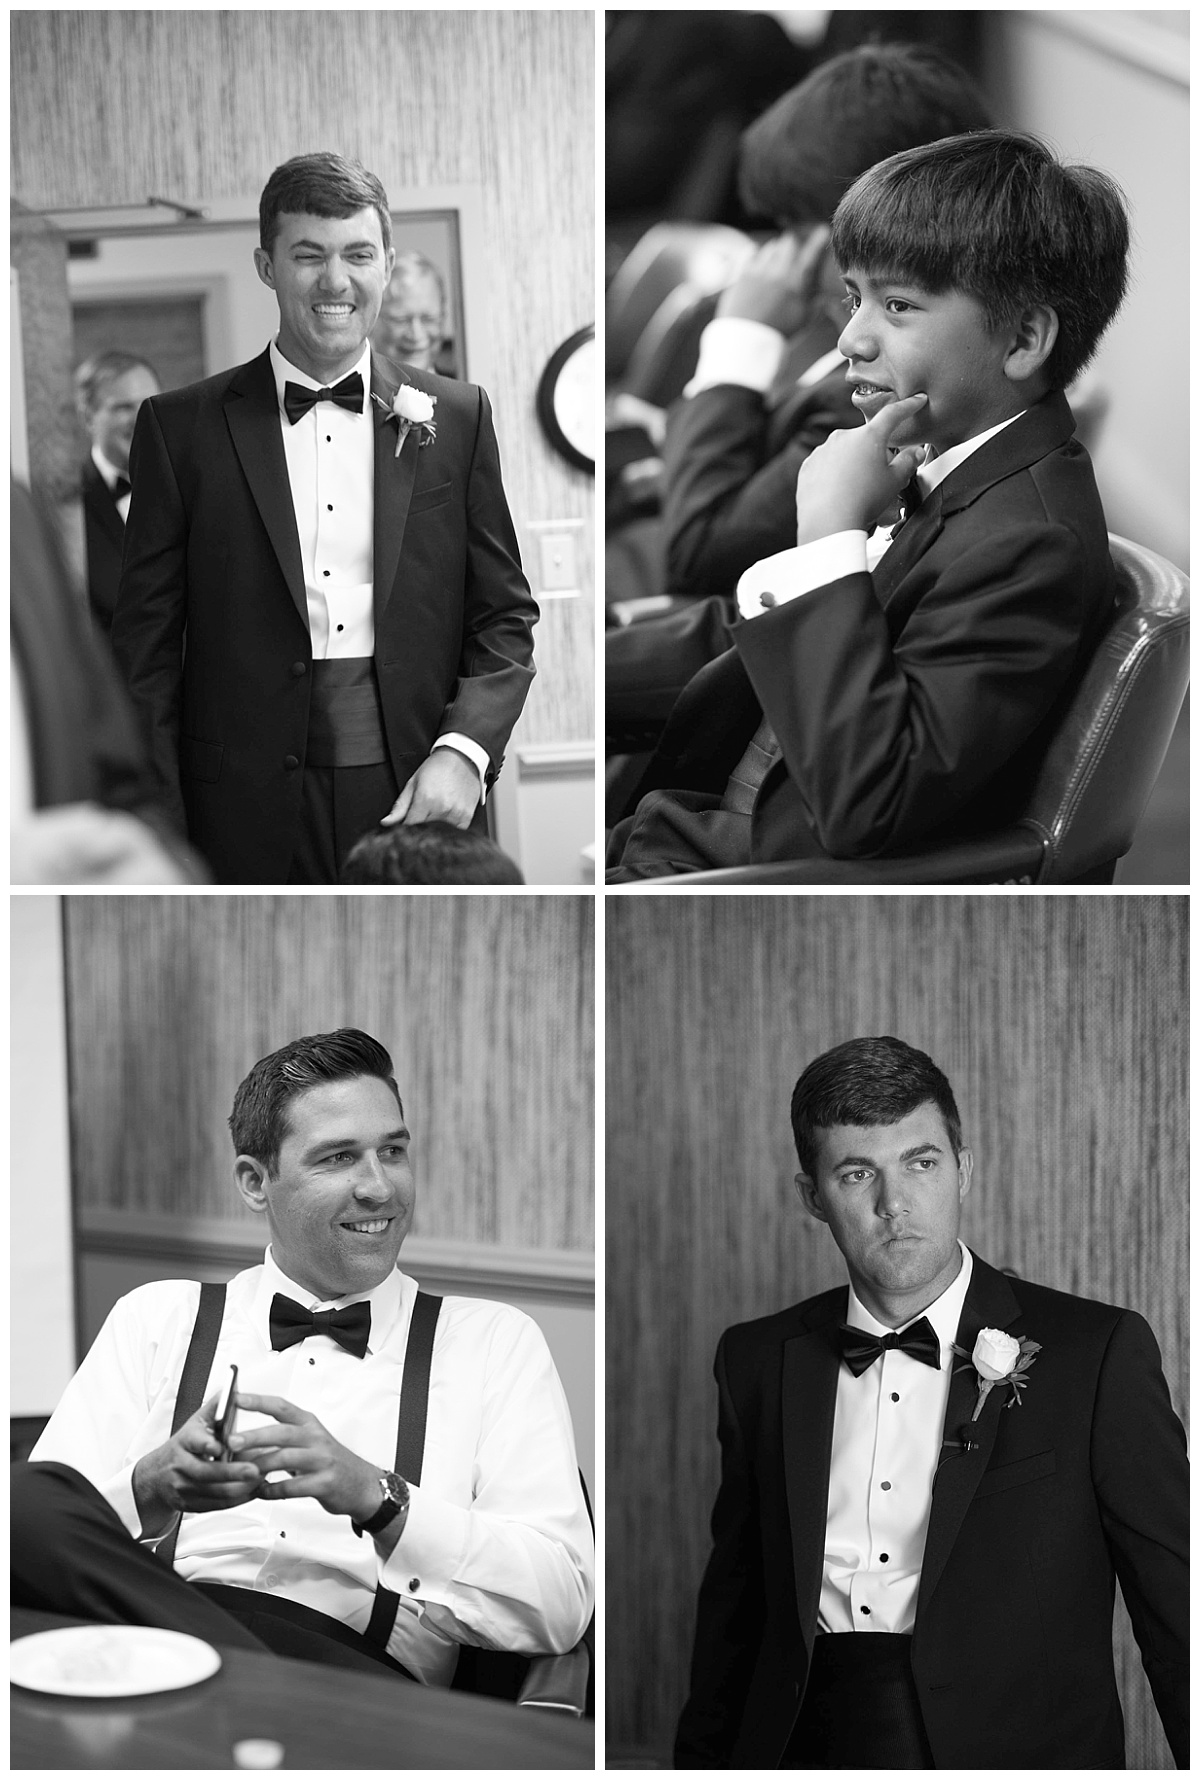 Groomsmen waiting for ceremony in black and white